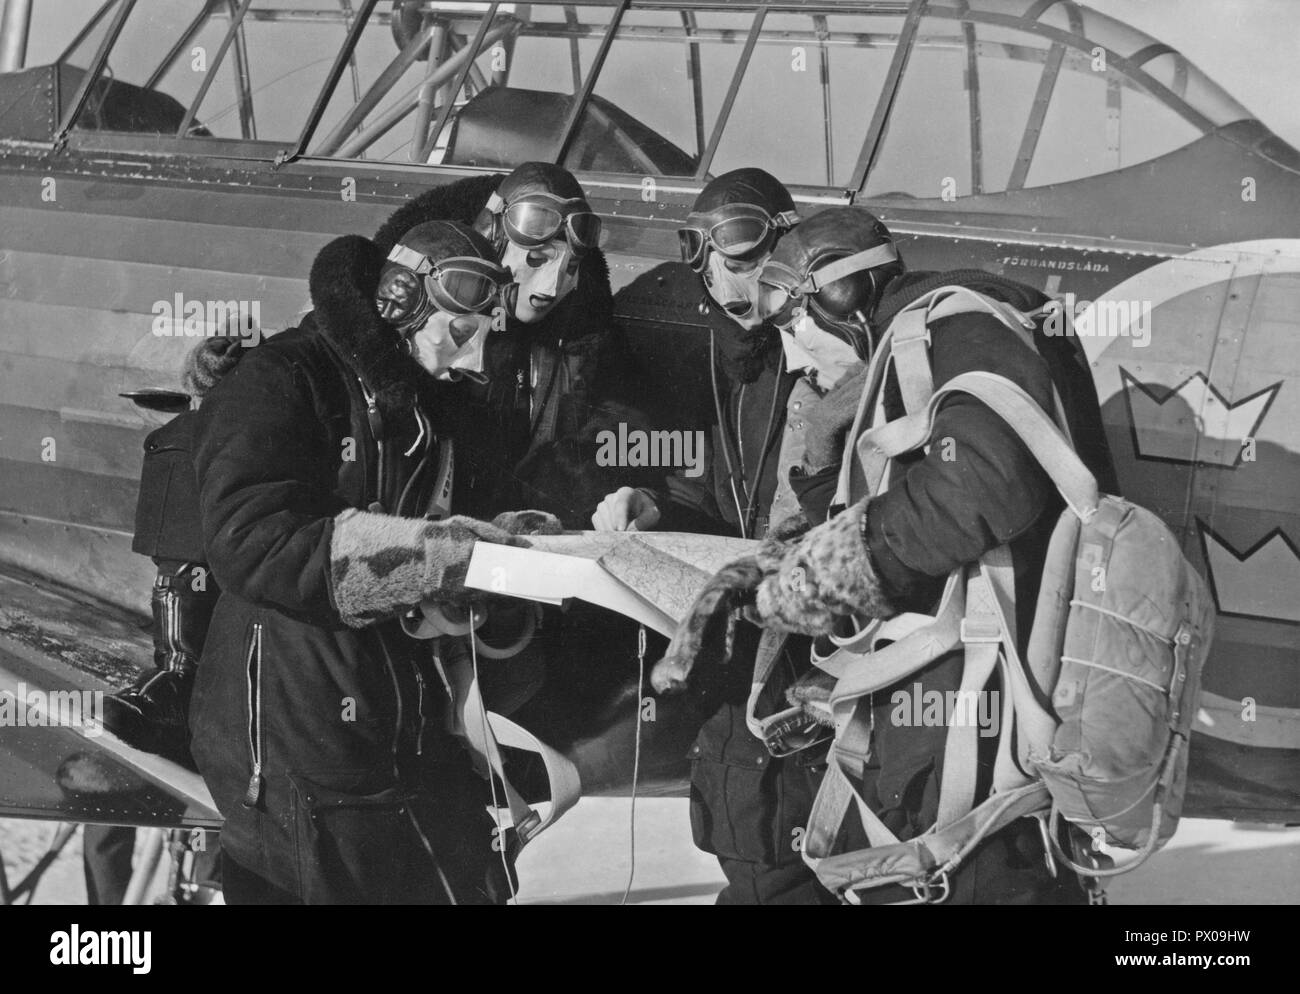 Pilots in the 1940s. A group of swedish pilots are studying the map together prior their flying assignment. They are pilots at the swedish airforce school of pilots at Grangärde. Sweden February 1942 Stock Photo